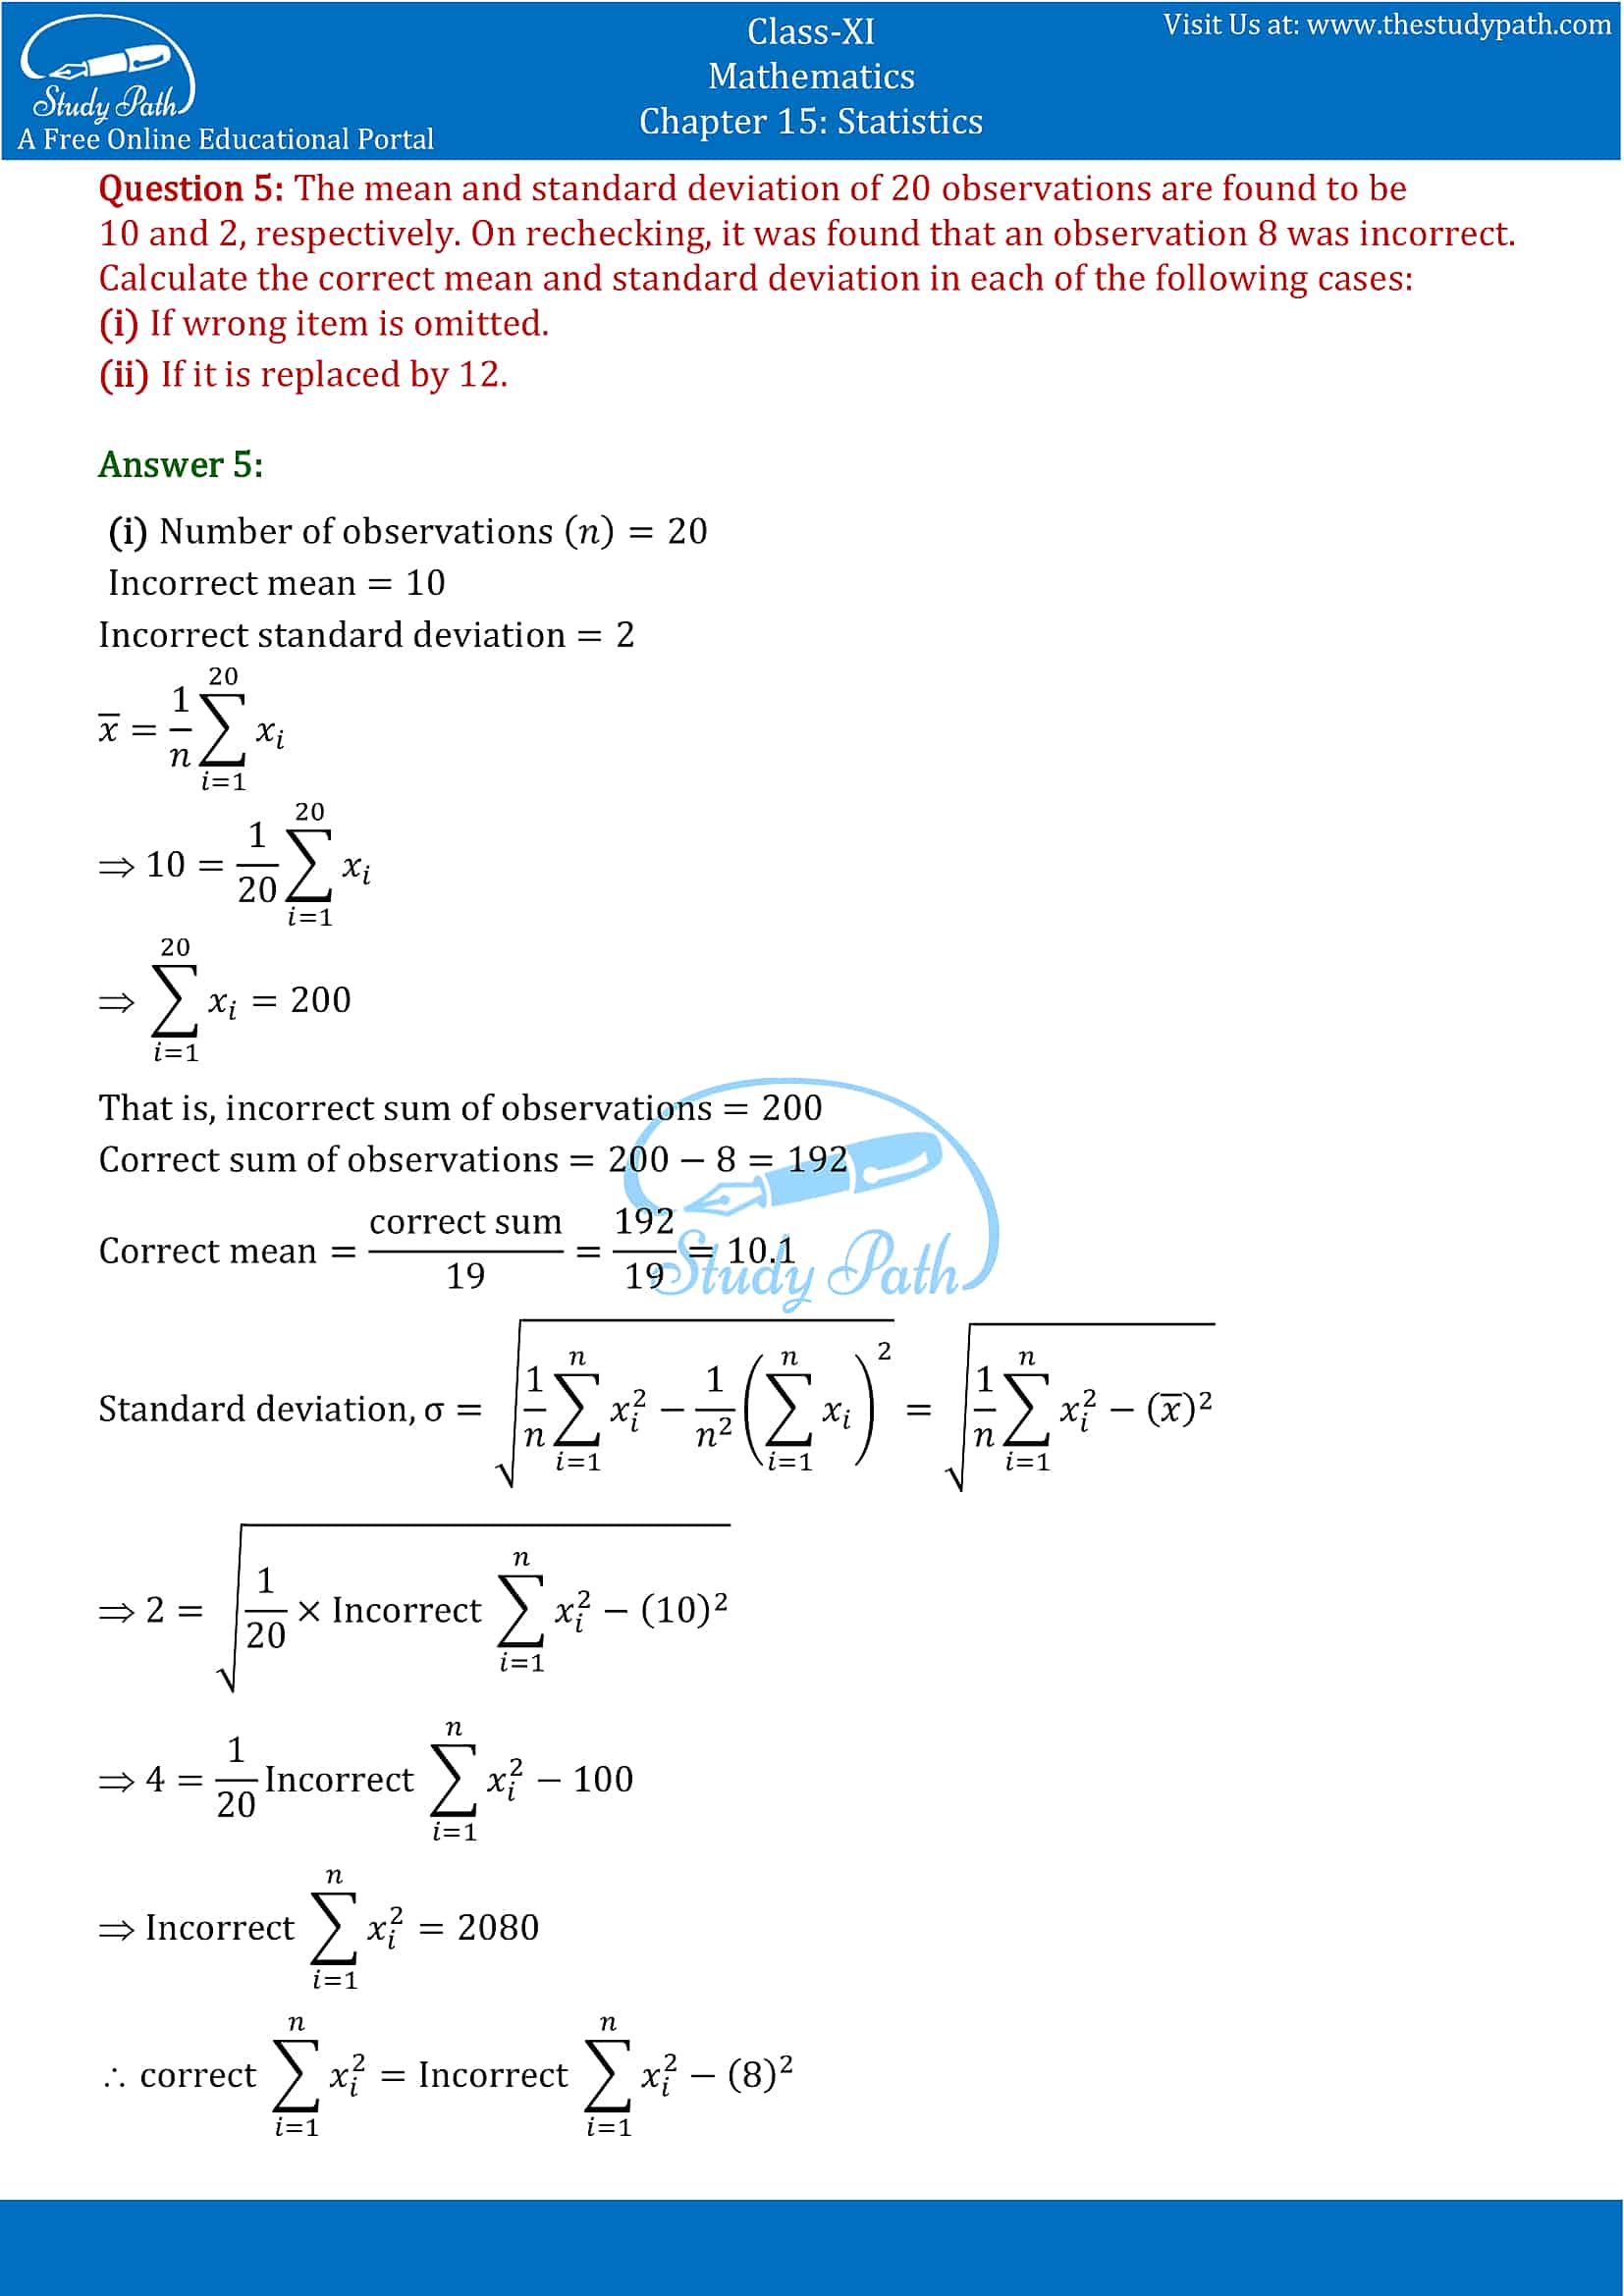 NCERT Solutions for Class 11 Maths chapter 15 Statistics Miscellaneous Exercise part-5